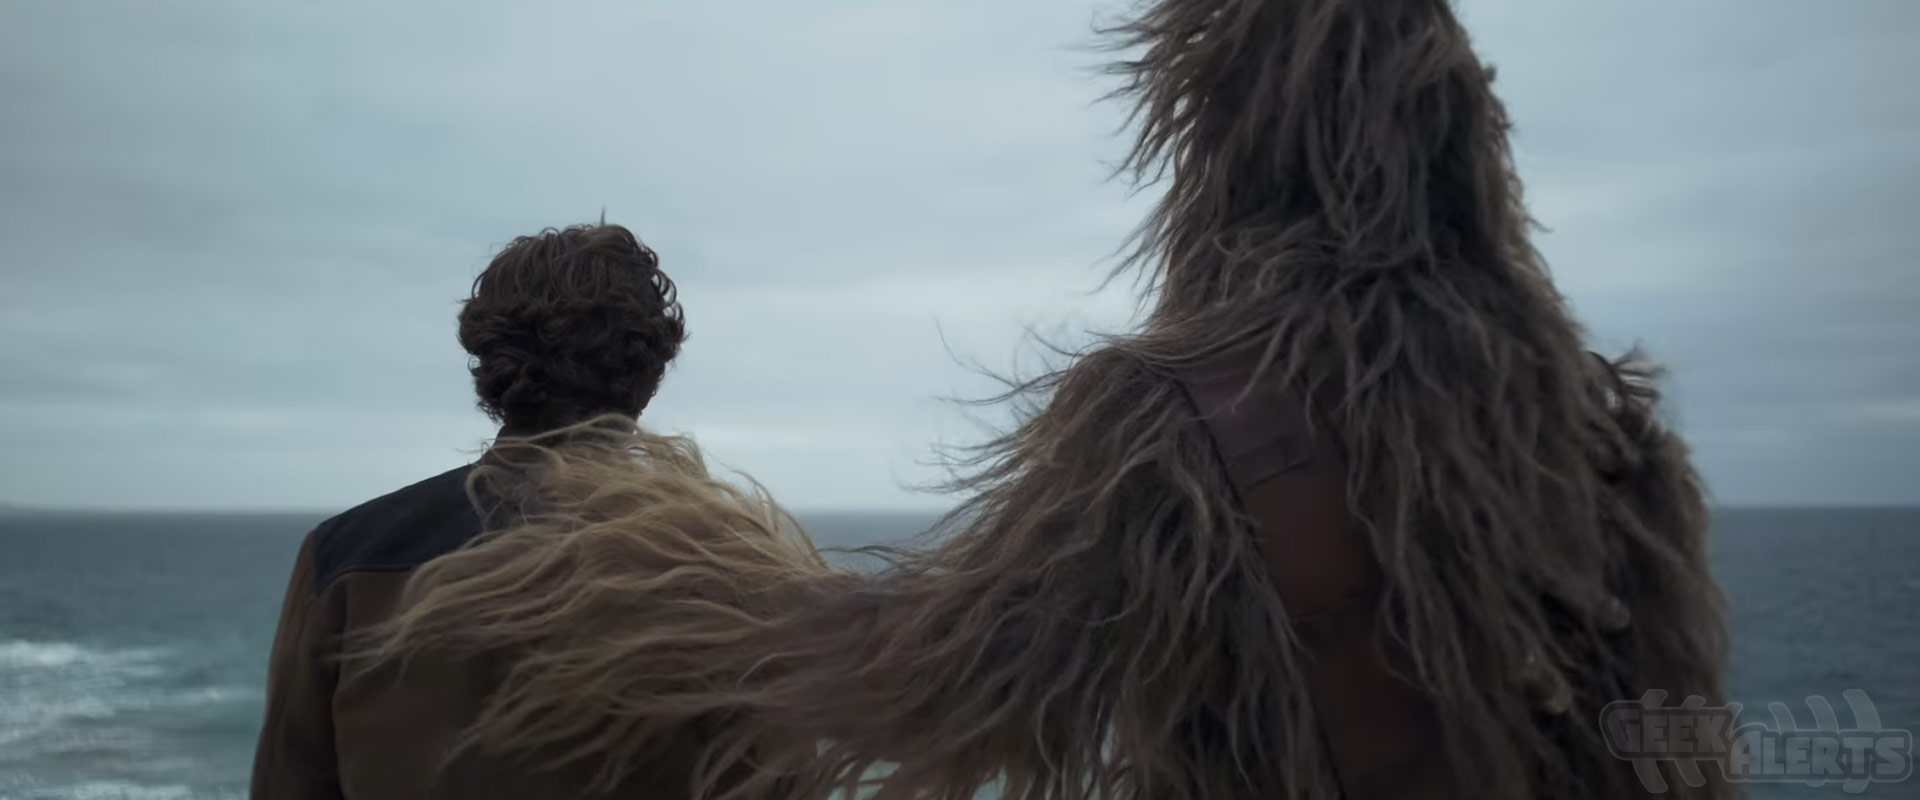 Solo: A Star Wars Story Super Bowl Trailer